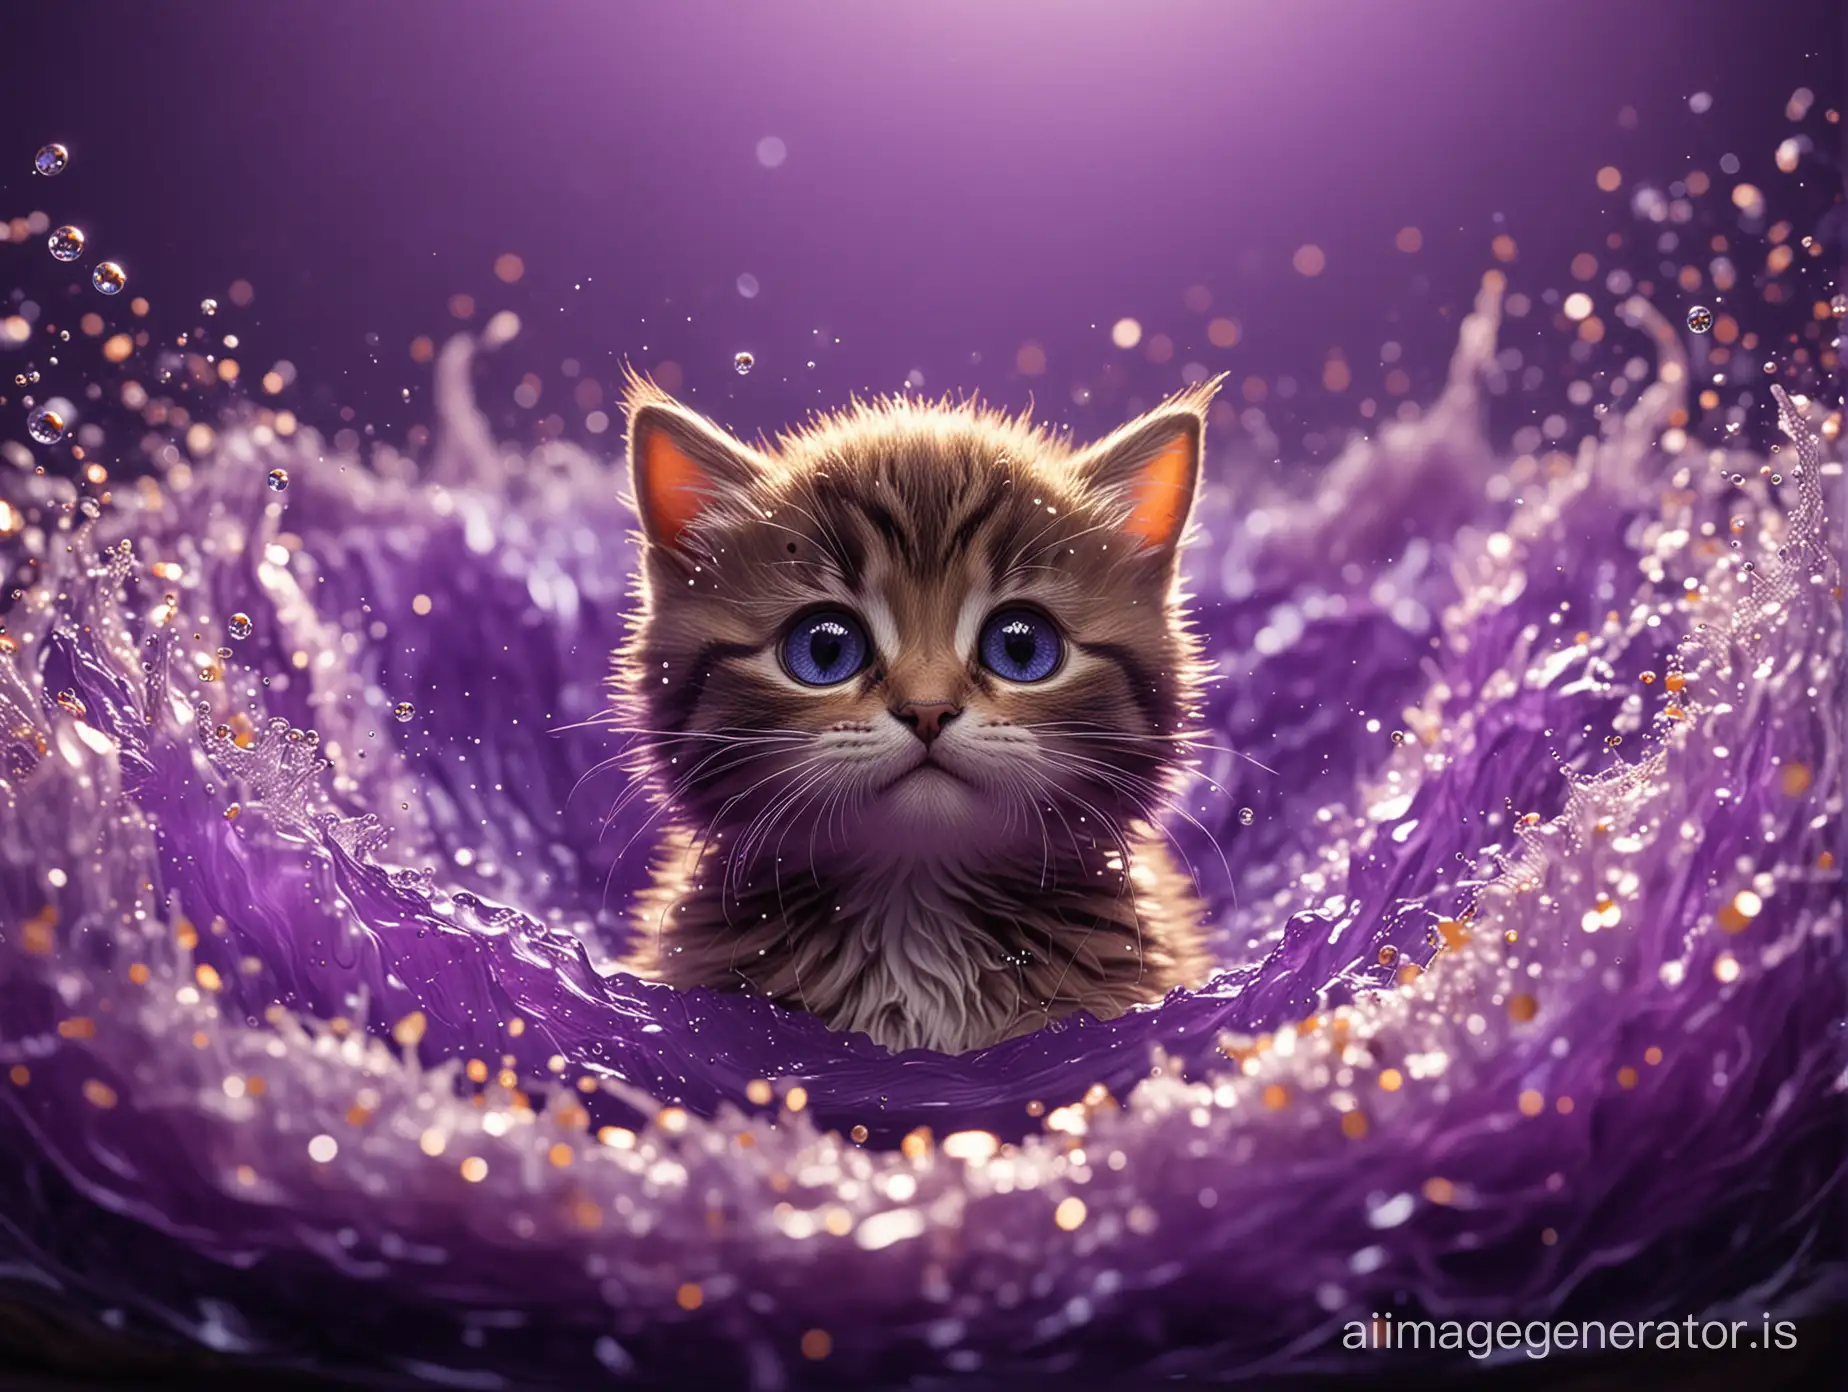 fantastically beautiful, super cute baby cat in a whirlpool of bright purple flow, toy art, huge expressive eyes, exquisite details, warm background, whirlwind of sparks, fantasy art, overdetalization, hyperrealism, bokeh and shimmering dust, chrysoberyl, flawless lines, high-precision detailing, chrysoberyl, best quality, cinematic, comic art, magnetic gradient Professional photography, bokeh, natural lighting, canon lens, shot on dslr 64 megapixels sharp focus